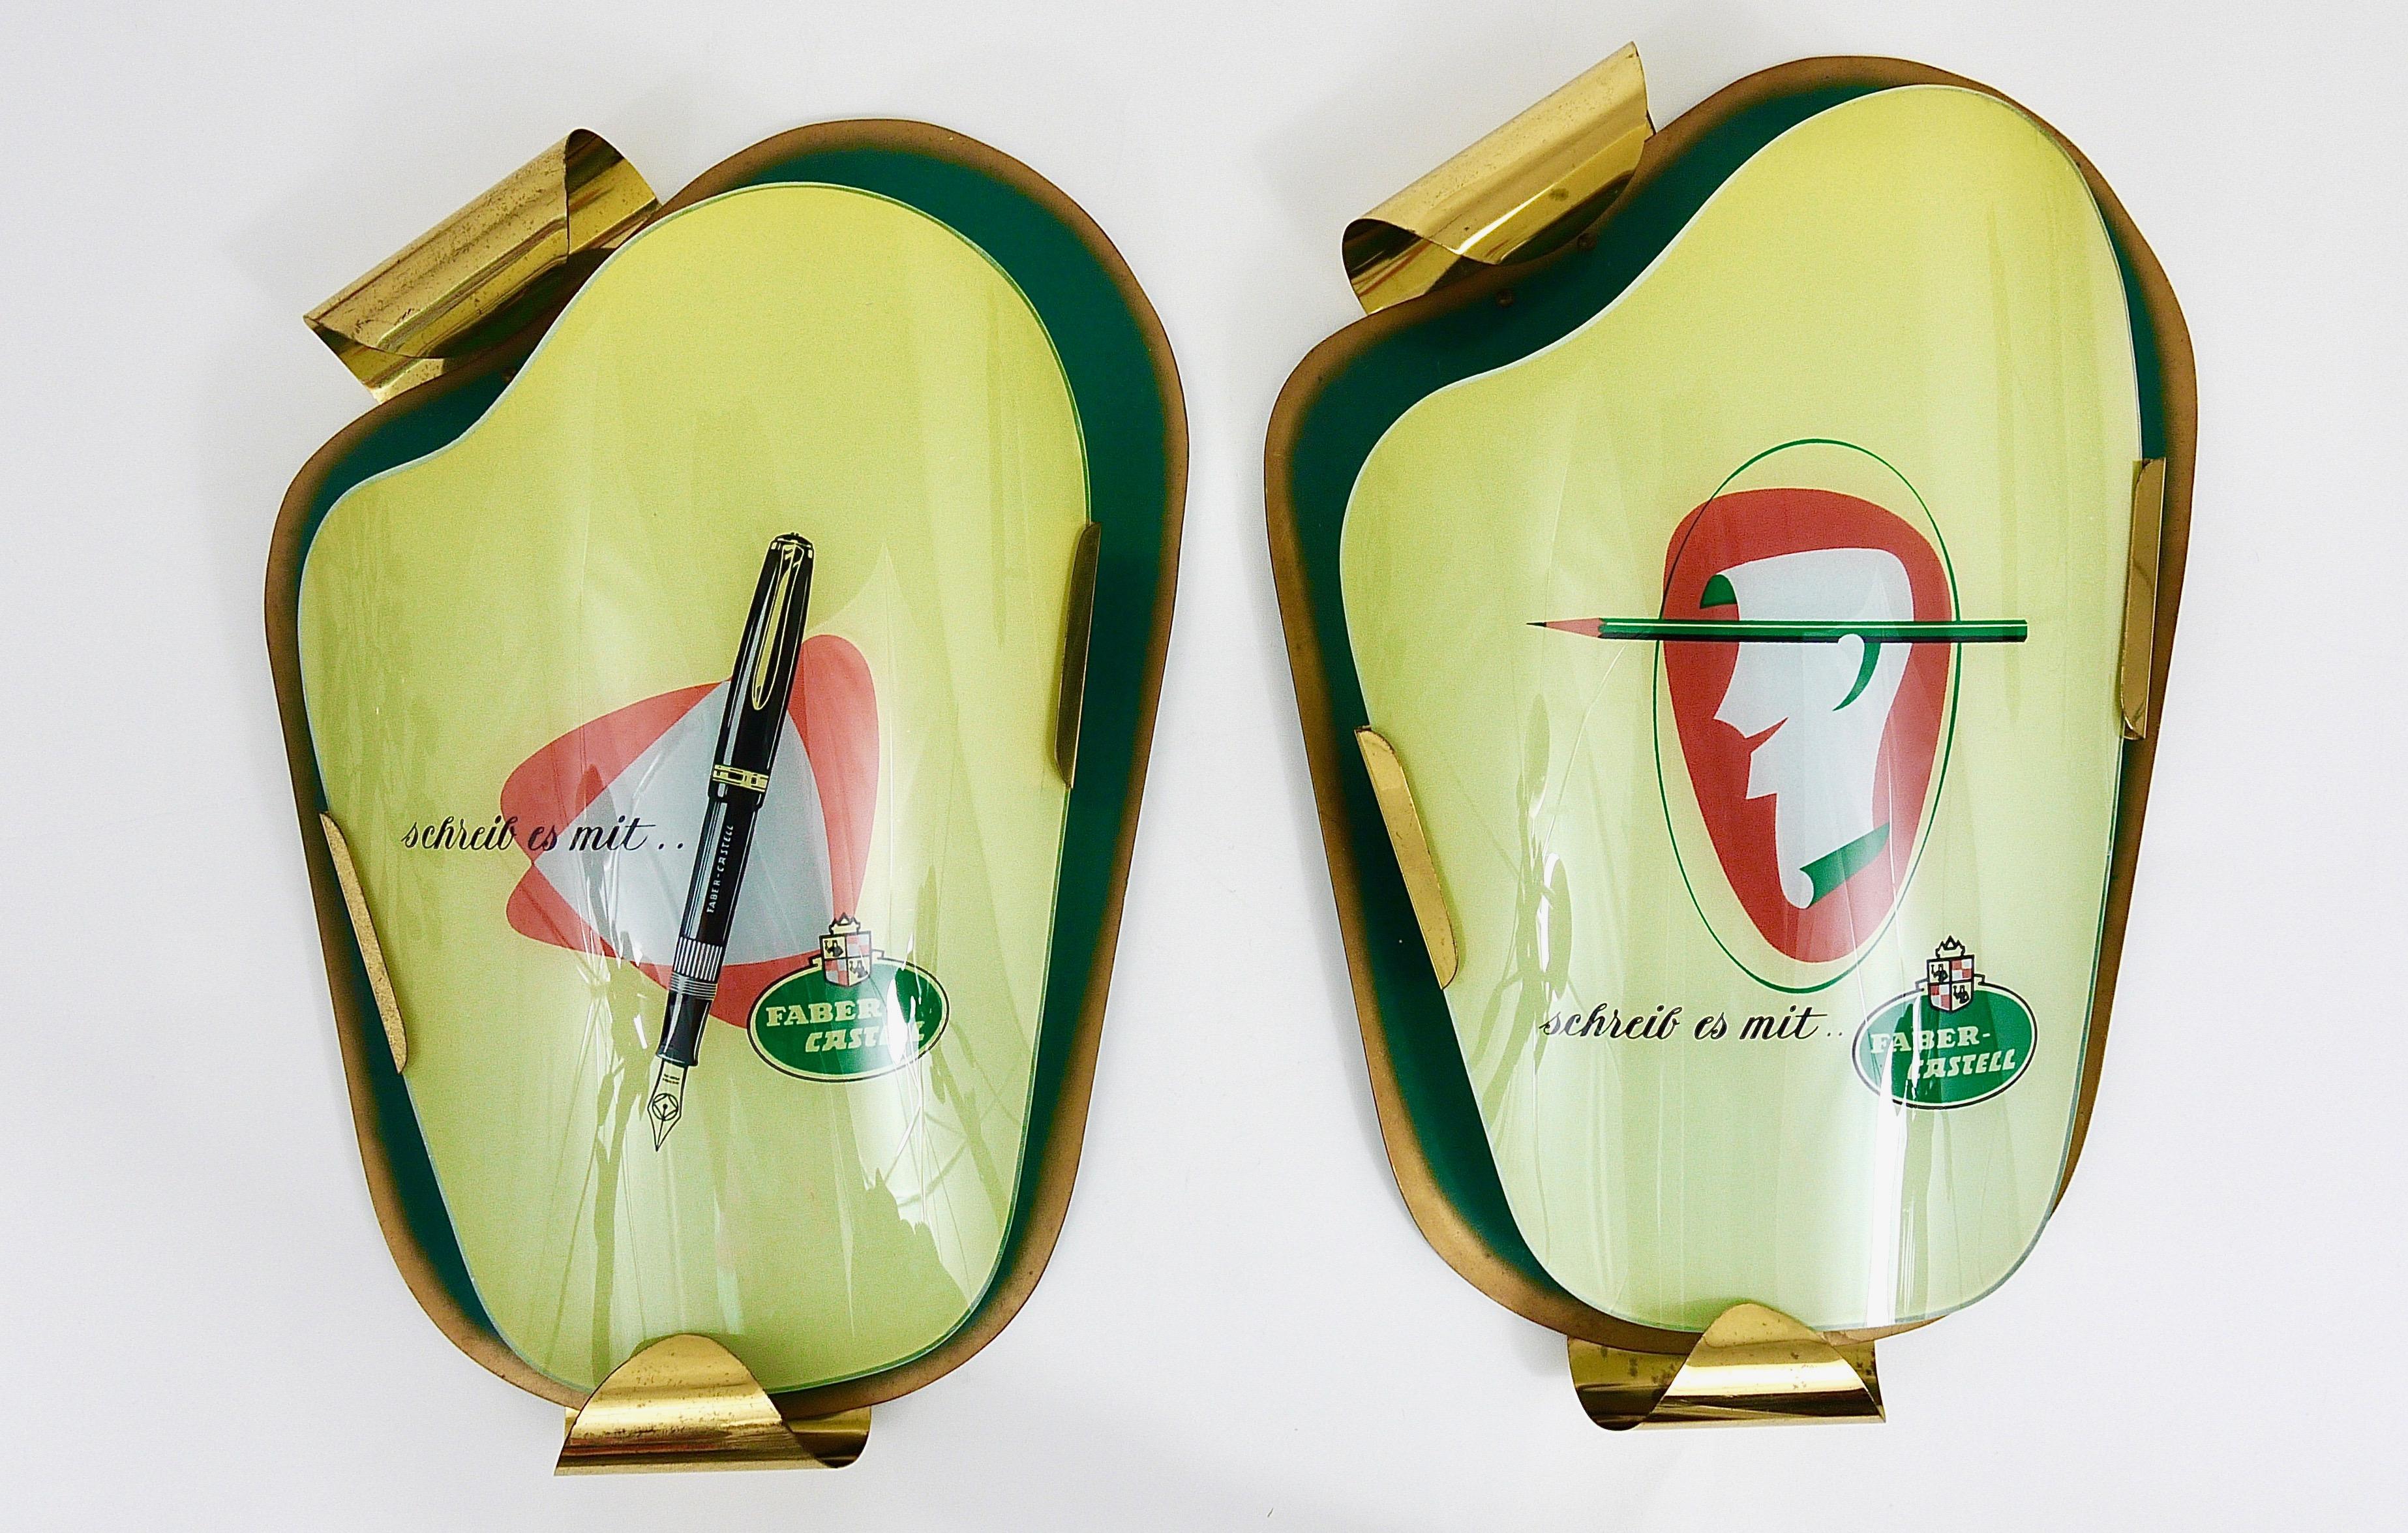 A beautiful asymmetrical midcentury advertising wall light for Faber-Castell fountain pens. A charming piece from the 1950s, made of brass and green lacquered metal and a front made of real glass. This advertising sign is in very good condition with